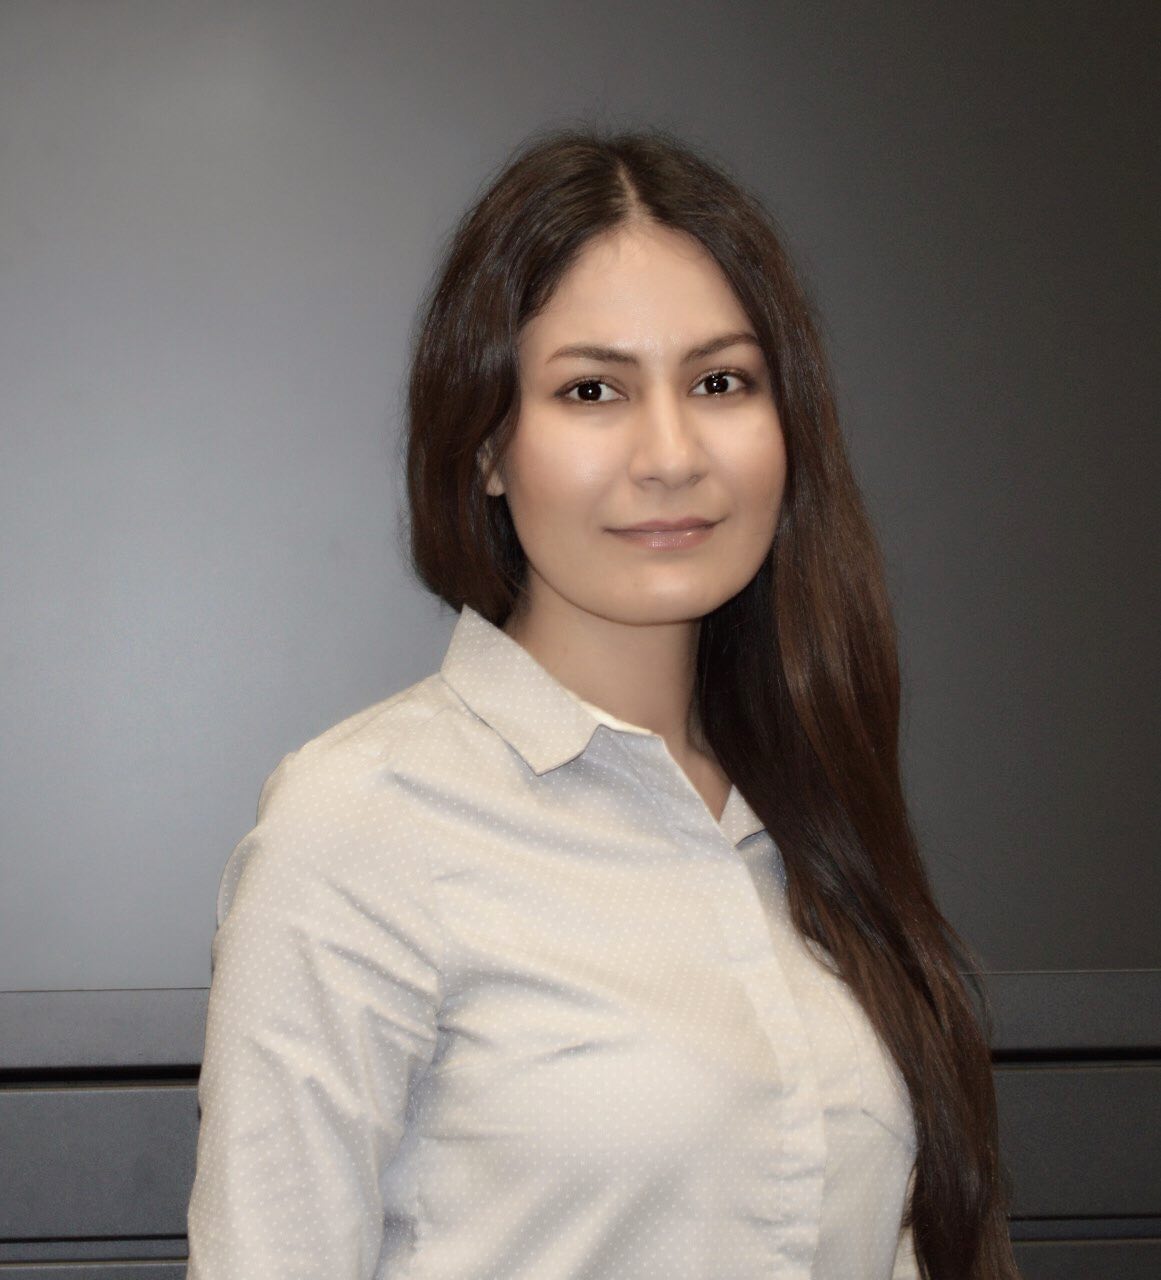 Leila Azizi of FIU is working on a STRIDE project with Dr. Mohammed Hadi titled "Performance Measurement & Management Using Connected & Automated Vehicle Data"